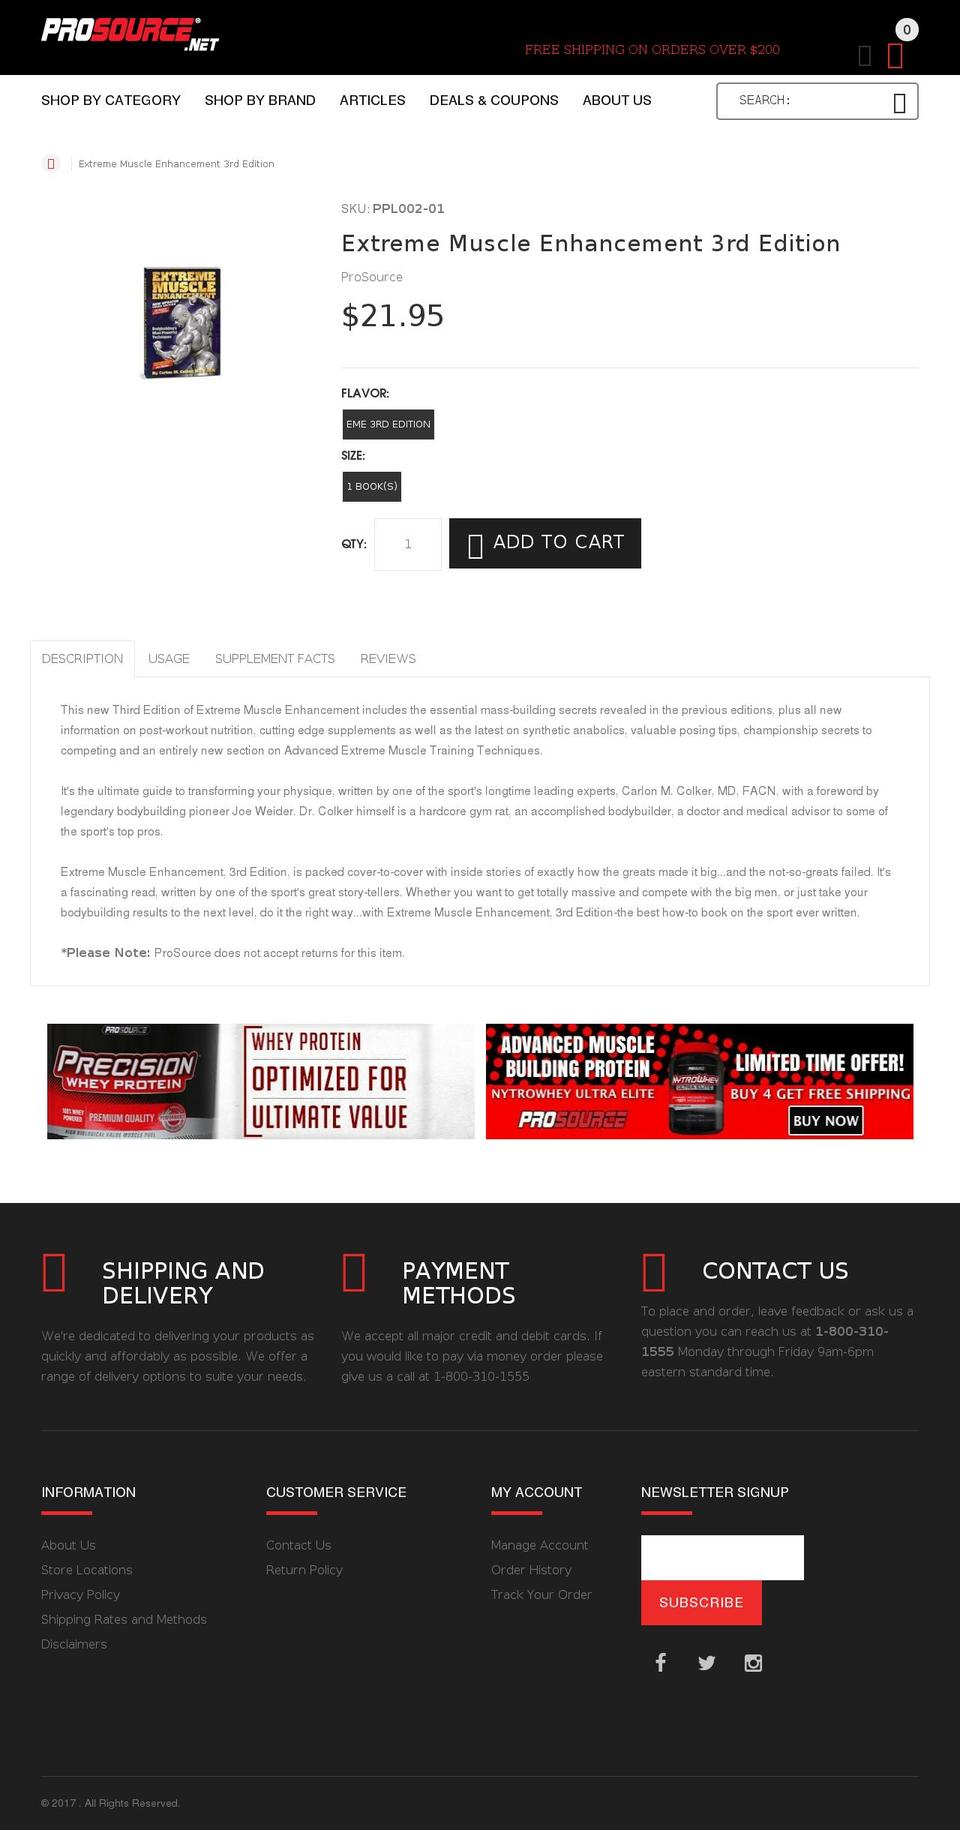 install-me-yourstore-v2-1-7 Shopify theme site example extrememusclenhancement.net